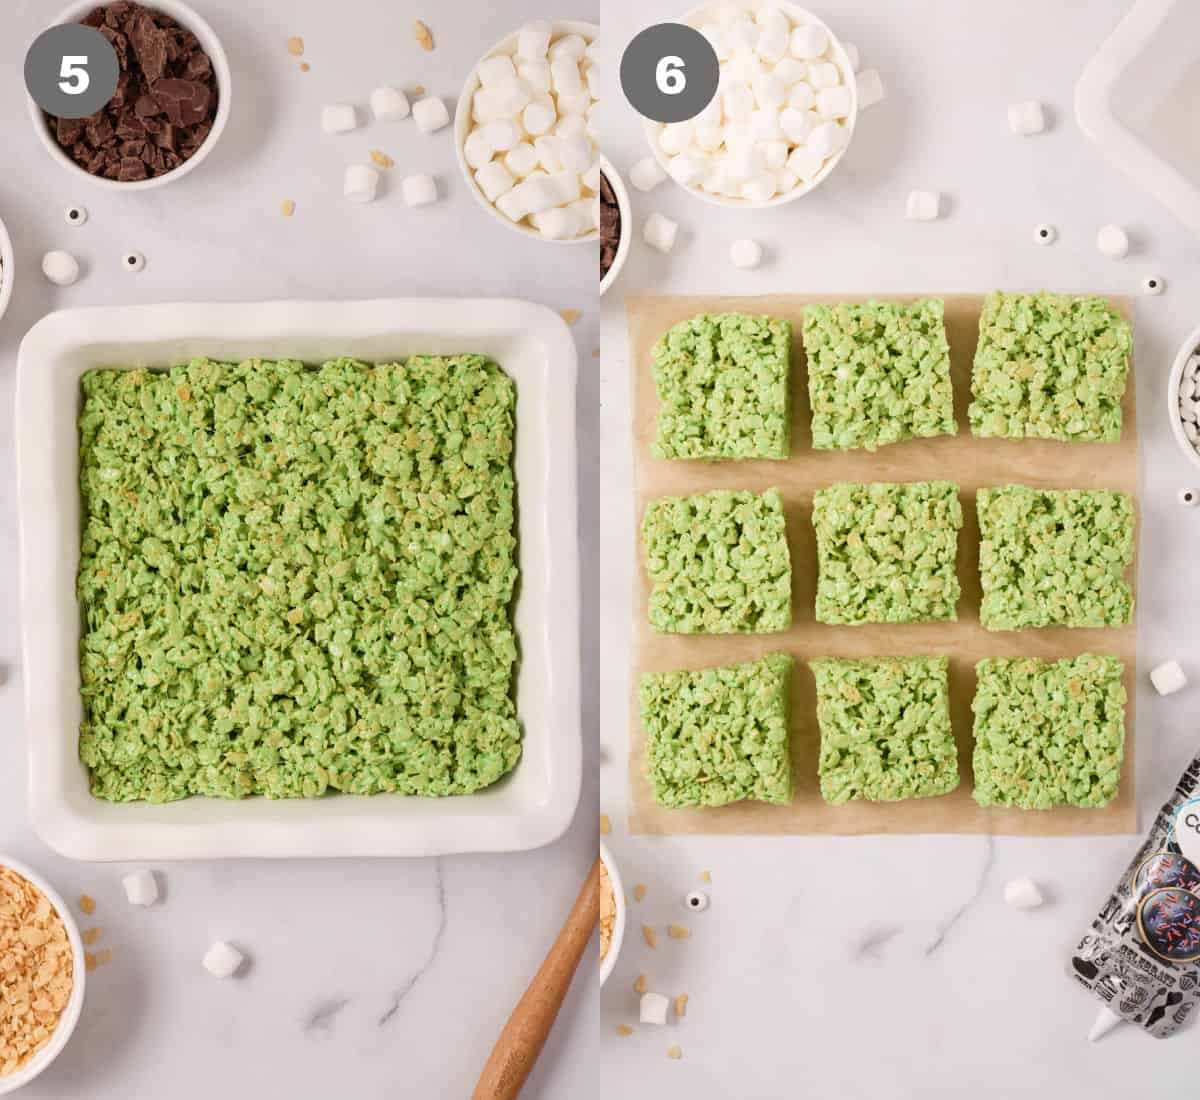 Rice krispie treats pressed into a pan the cut into squares.